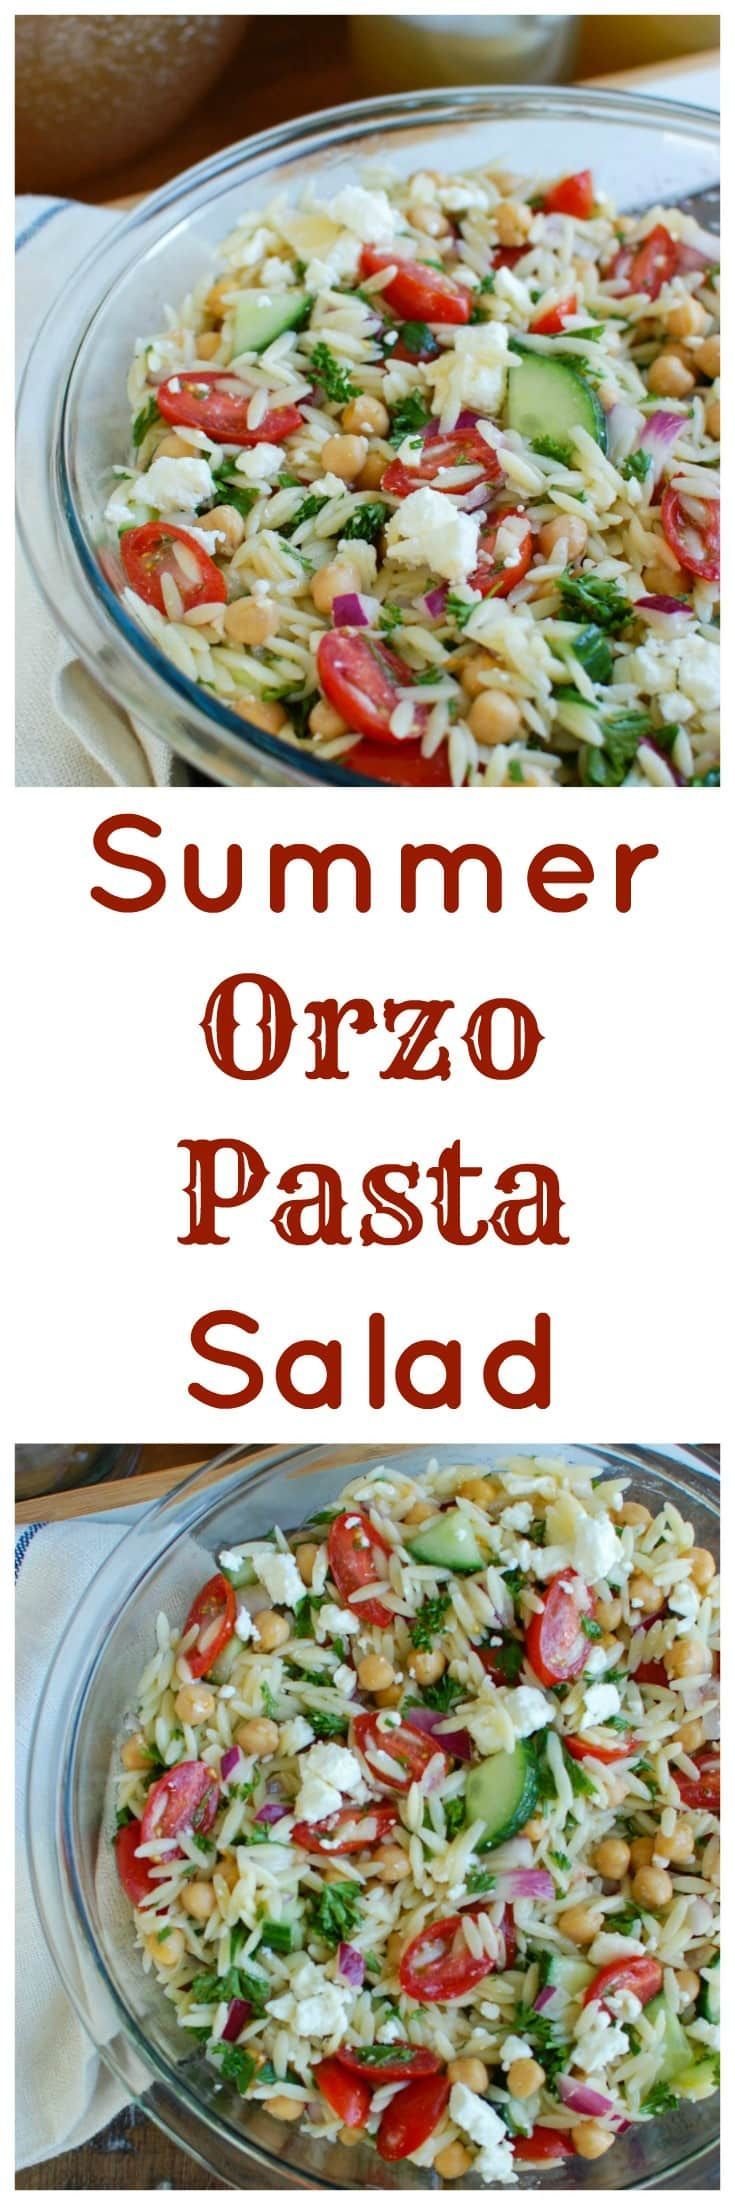 Summer Orzo Pasta Salad is a great addition to any summer get together! This salad mixes together orzo pasta, chickpeas, feta